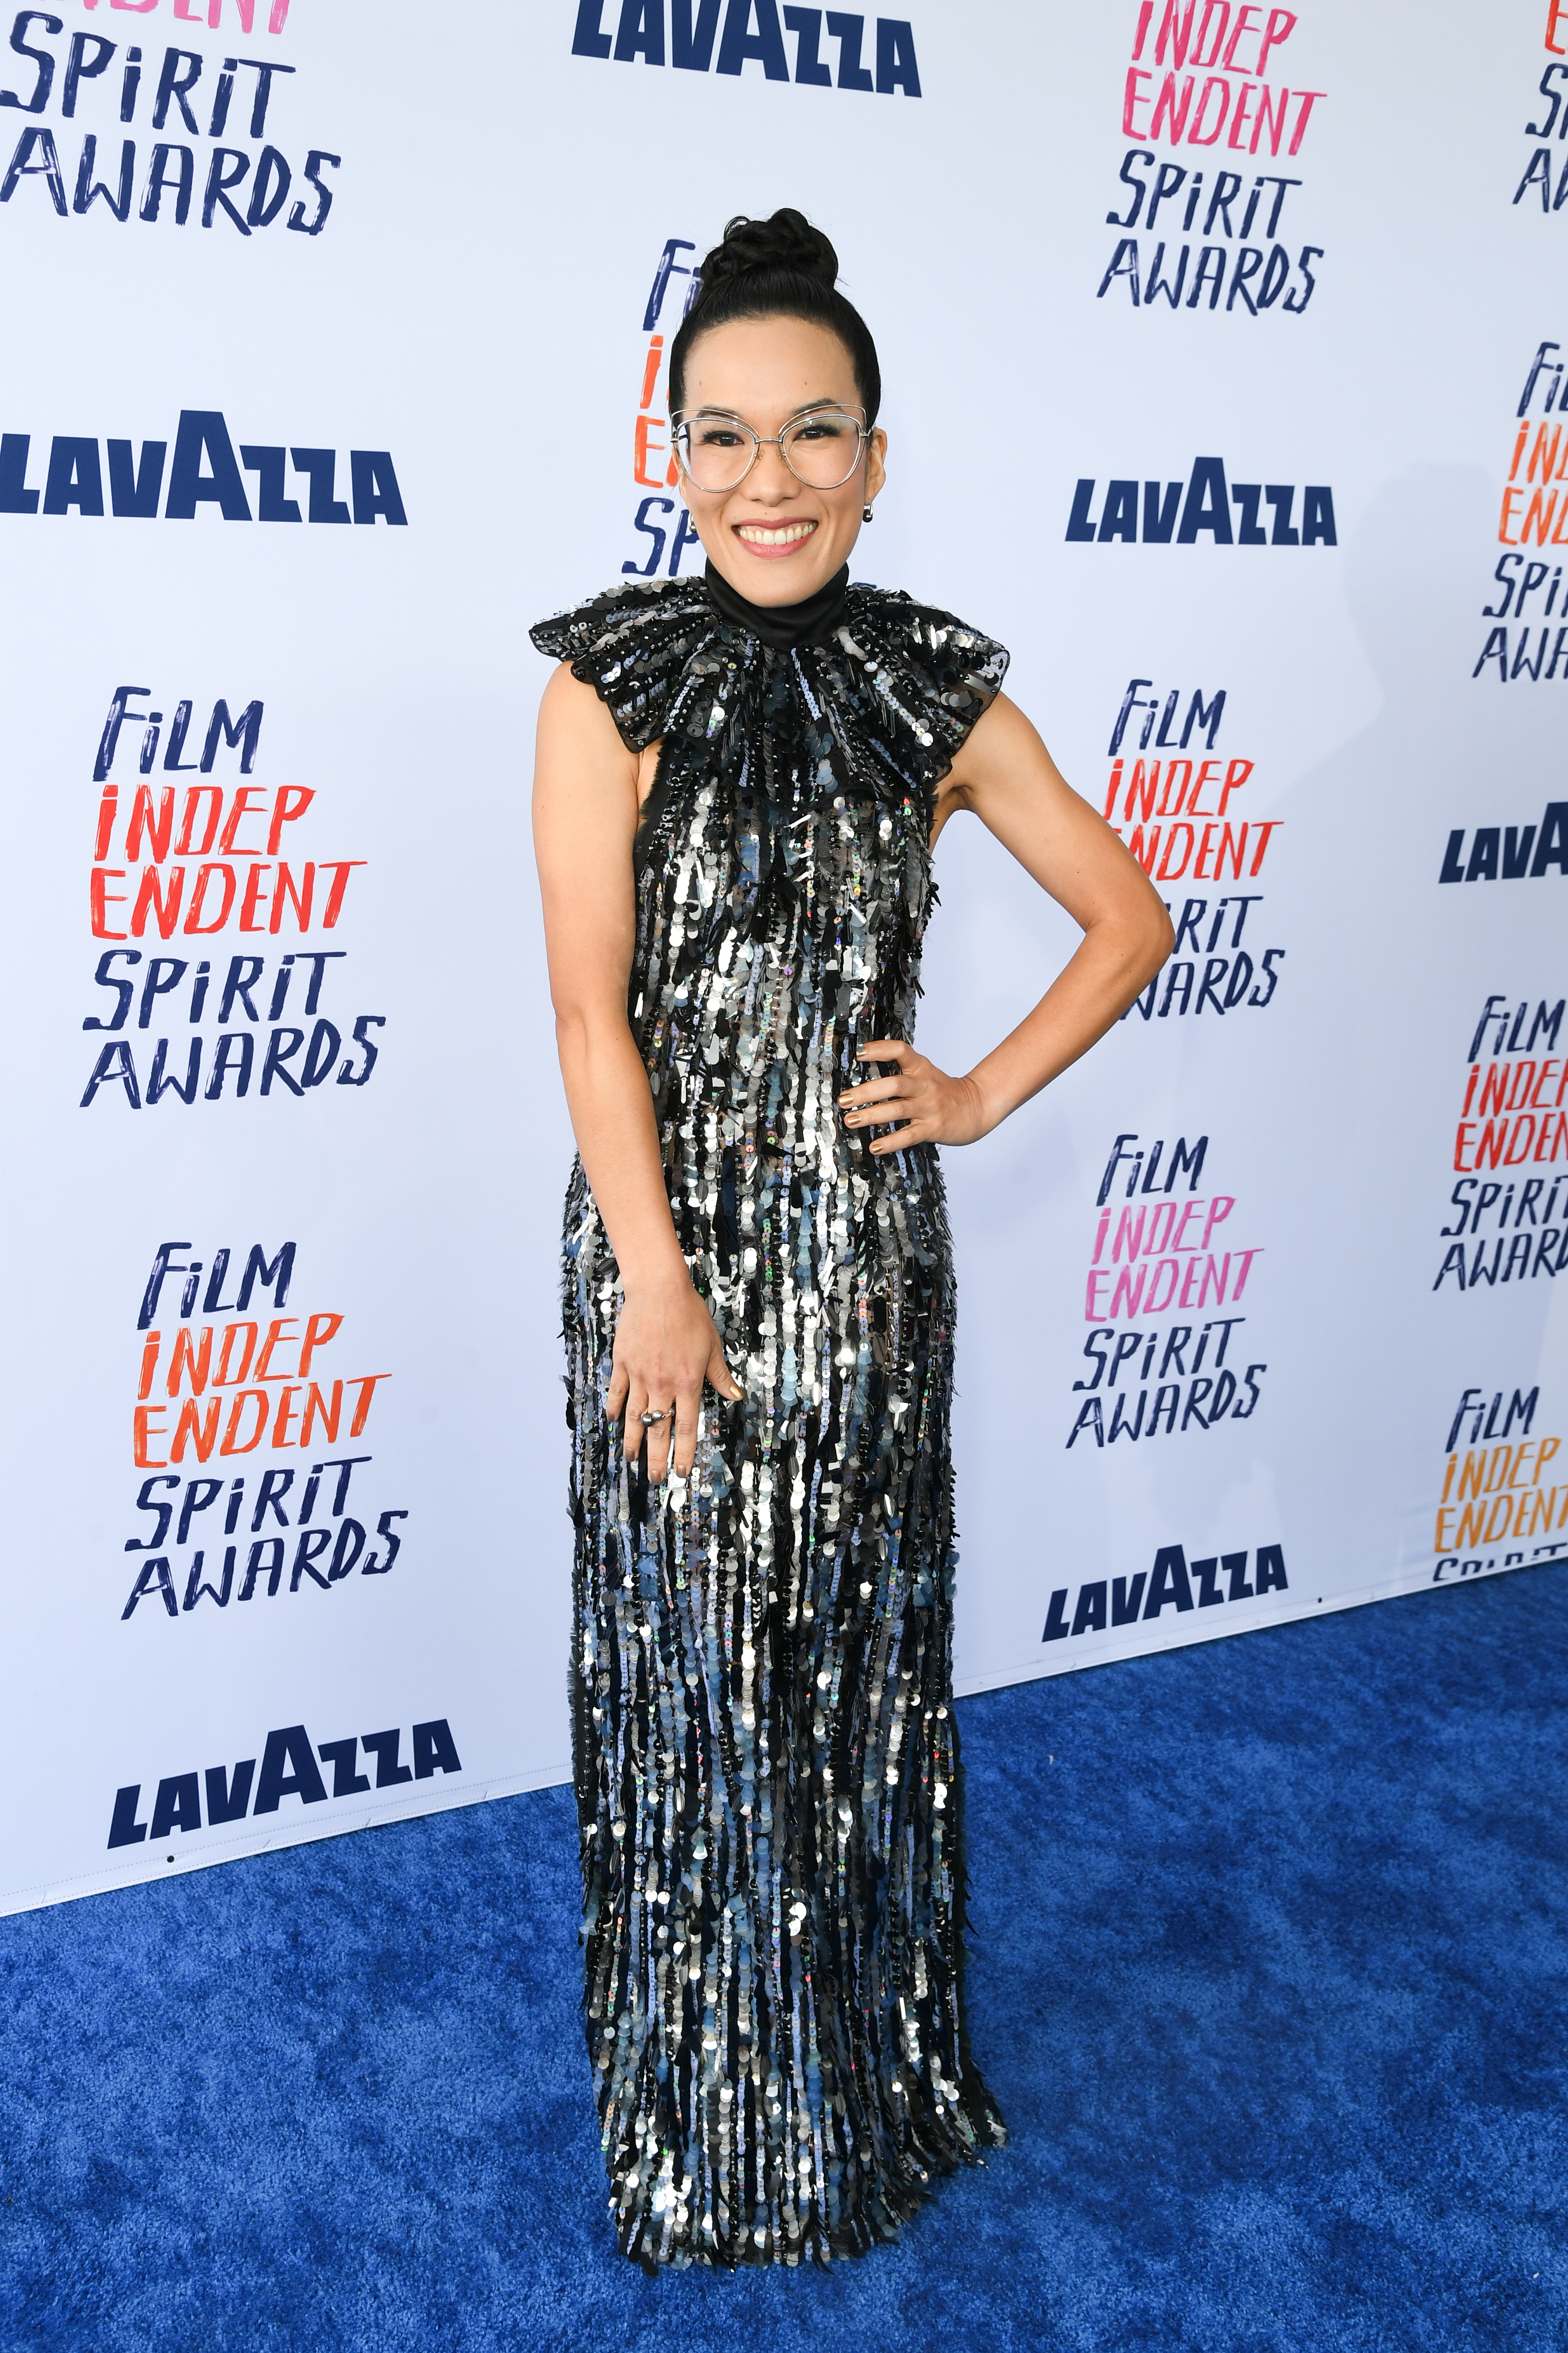 Ali posing in a sequined gown with a high neck and ruffled details